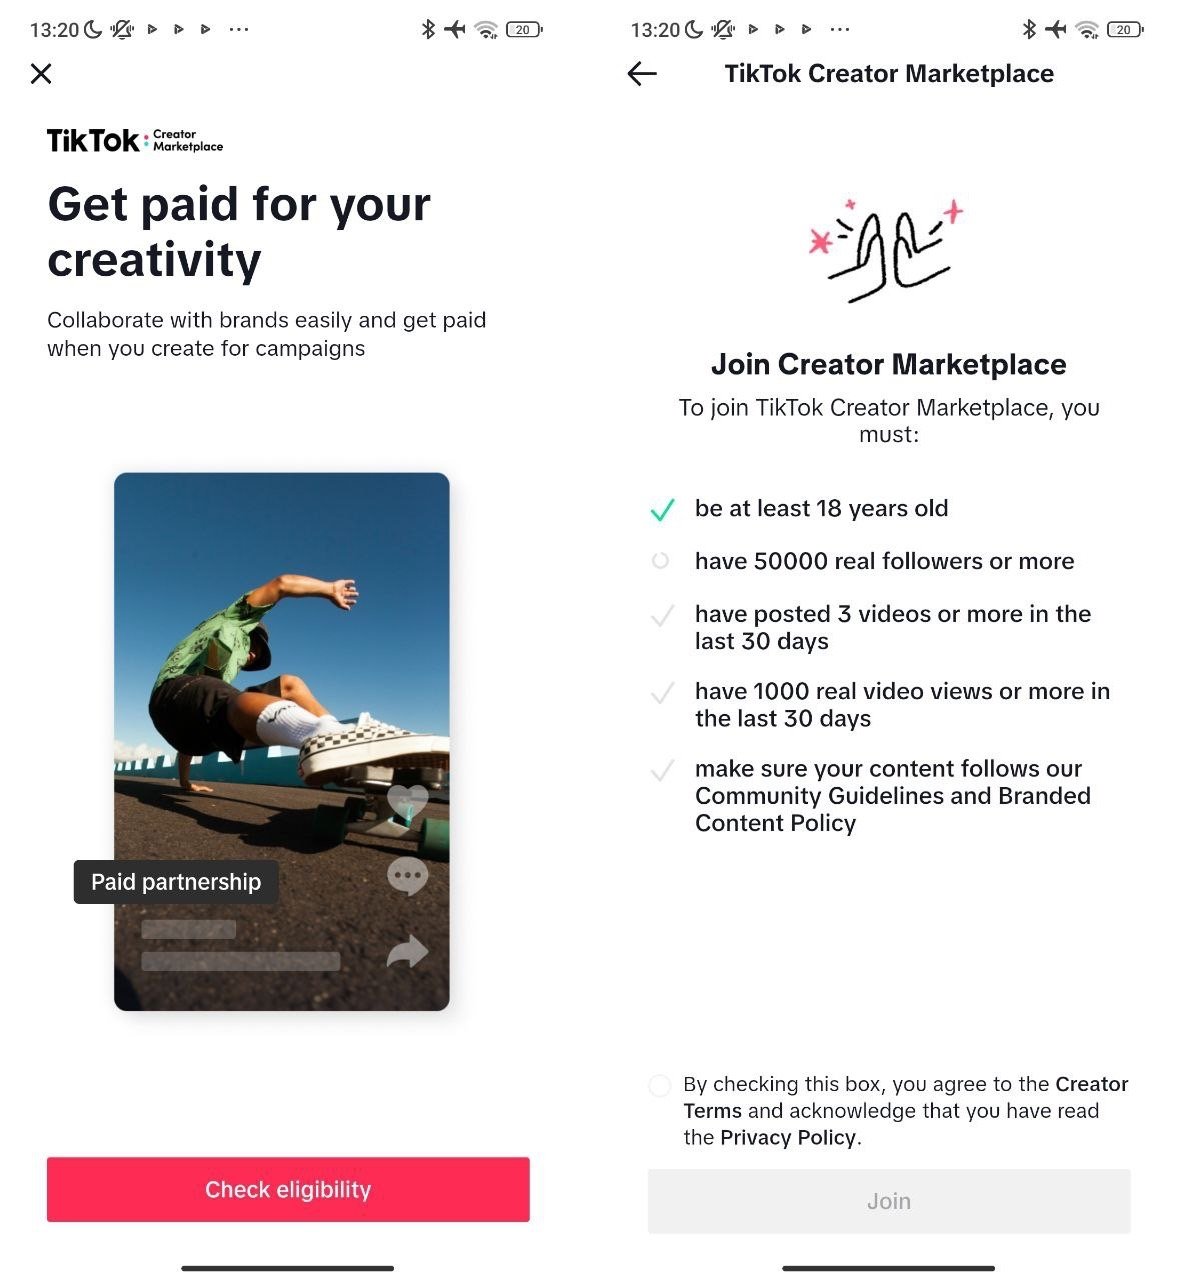 Cooperating with brands through TikTok or private agreements can monetize your content